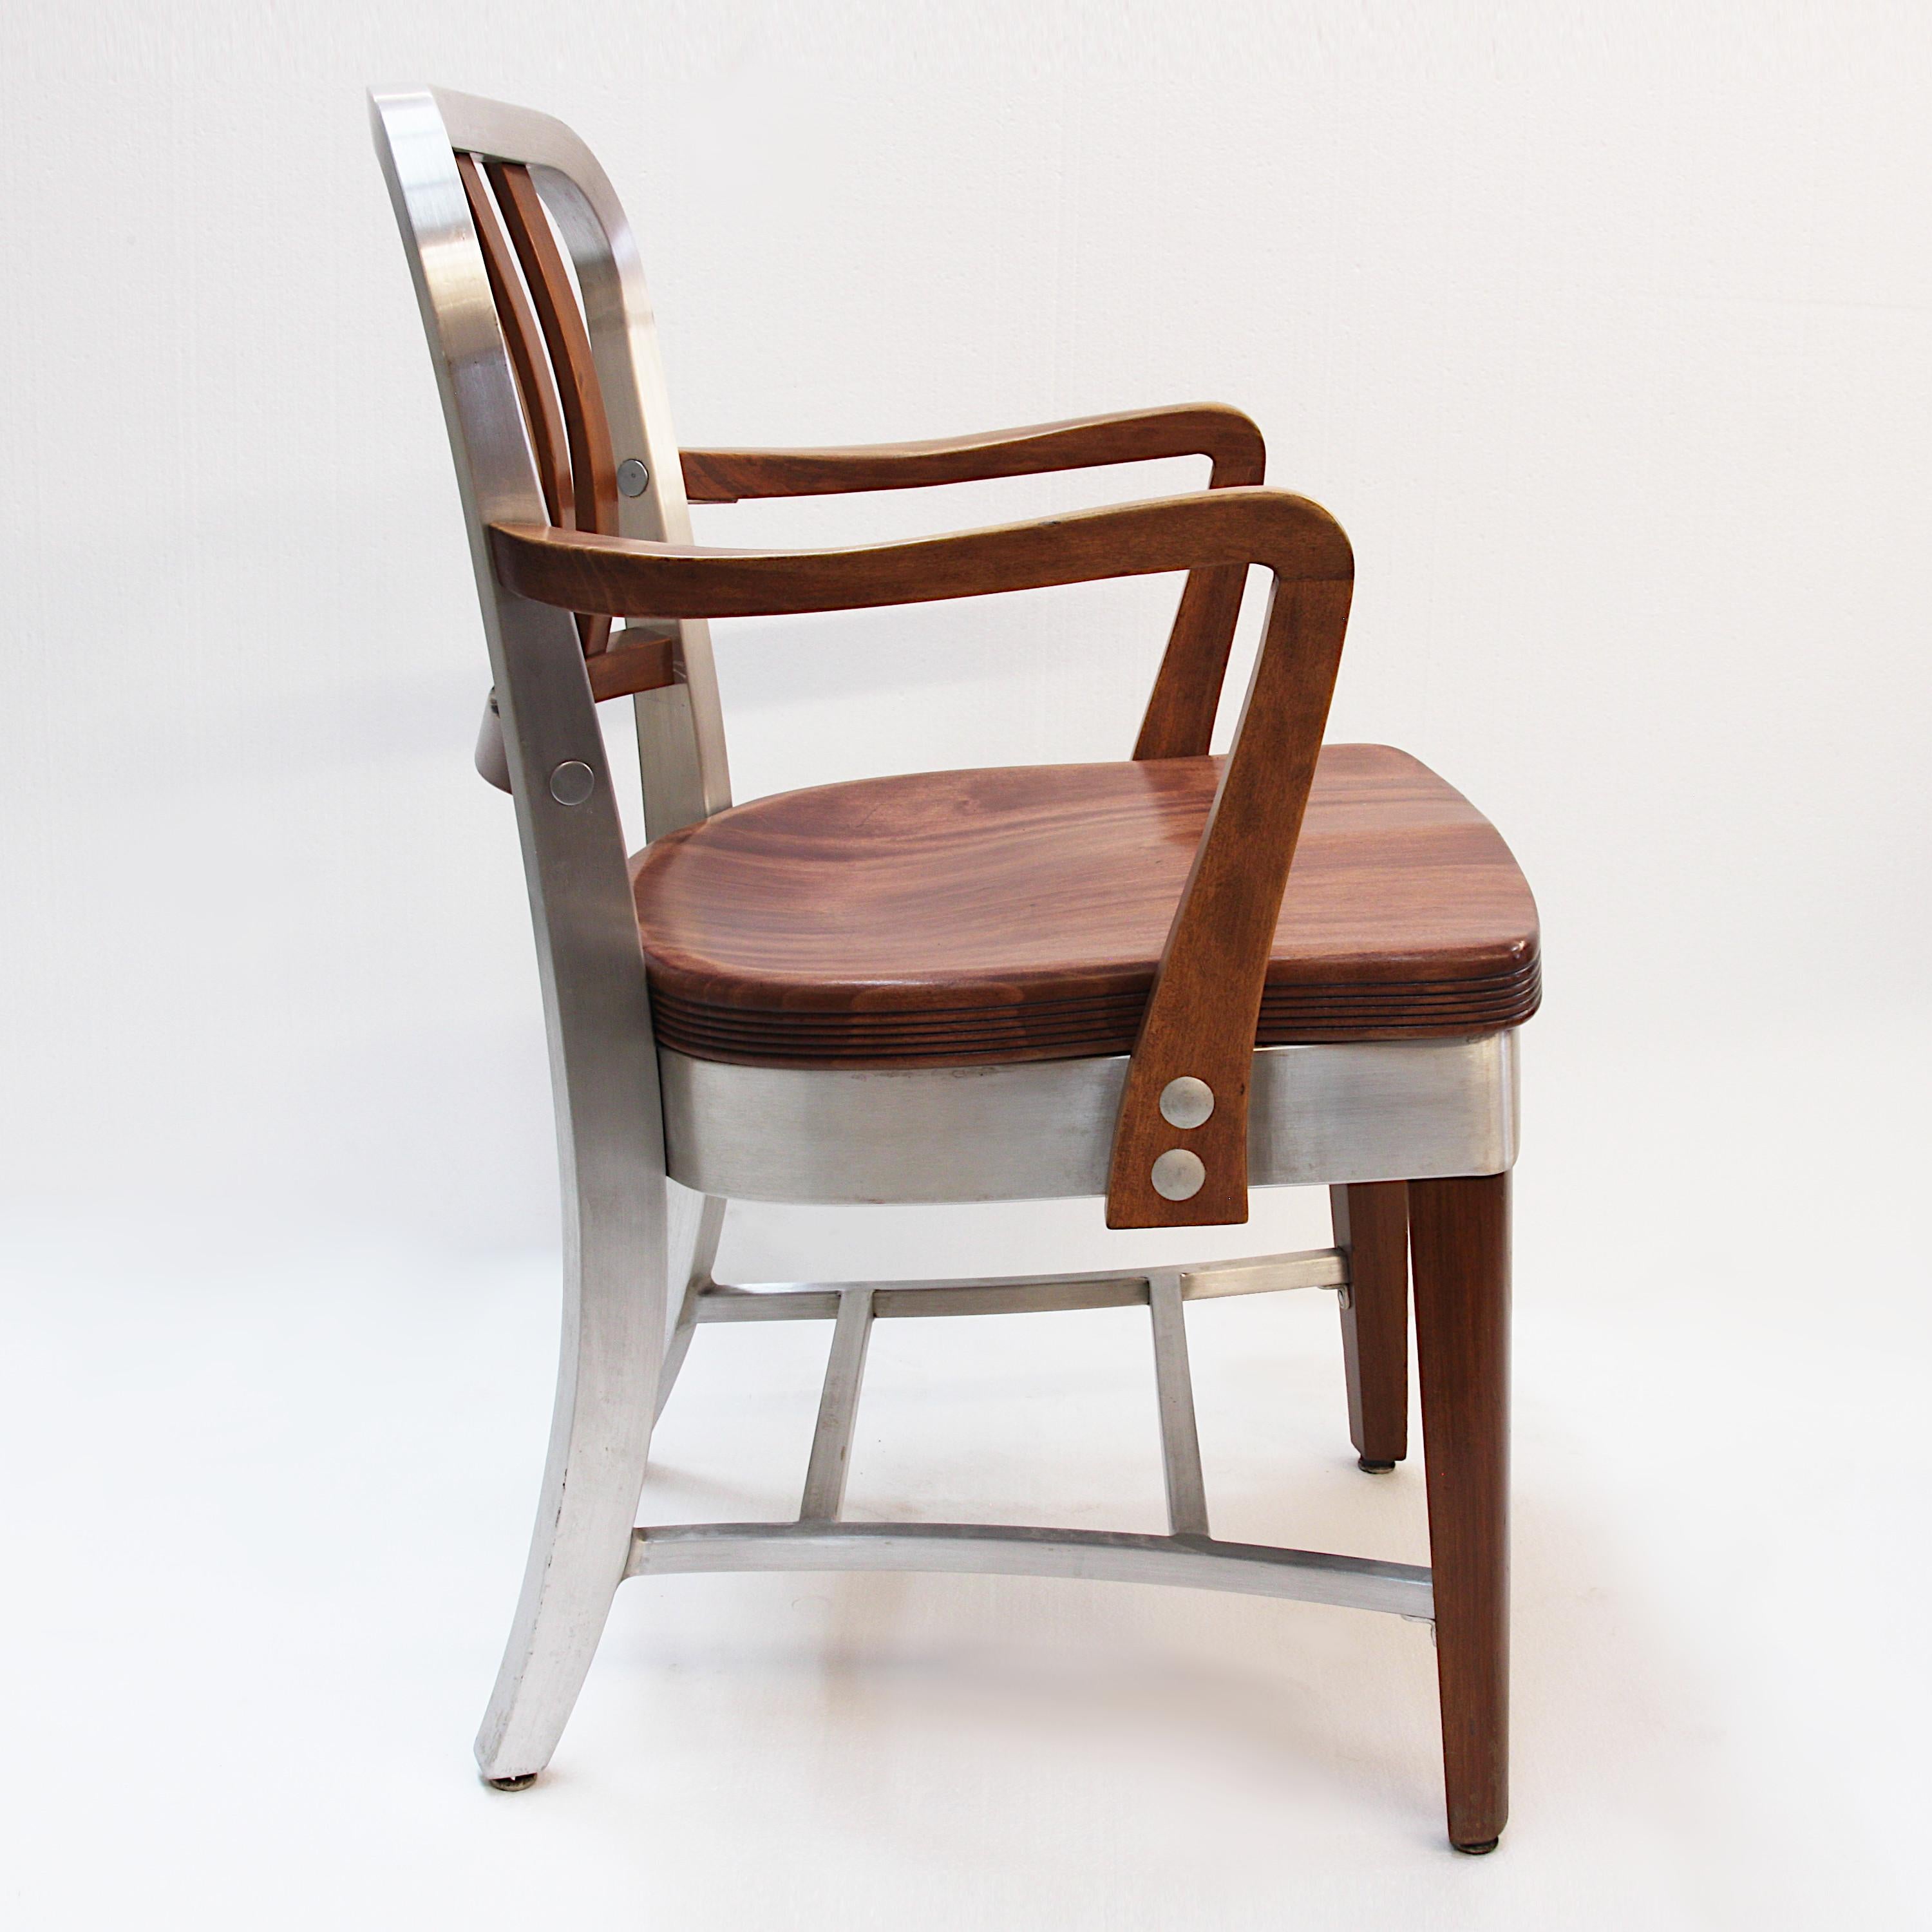 Mid-20th Century Set of Six Mid-Century Modern Industrial Aluminum & Wood Chairs by Shaw-Walker 